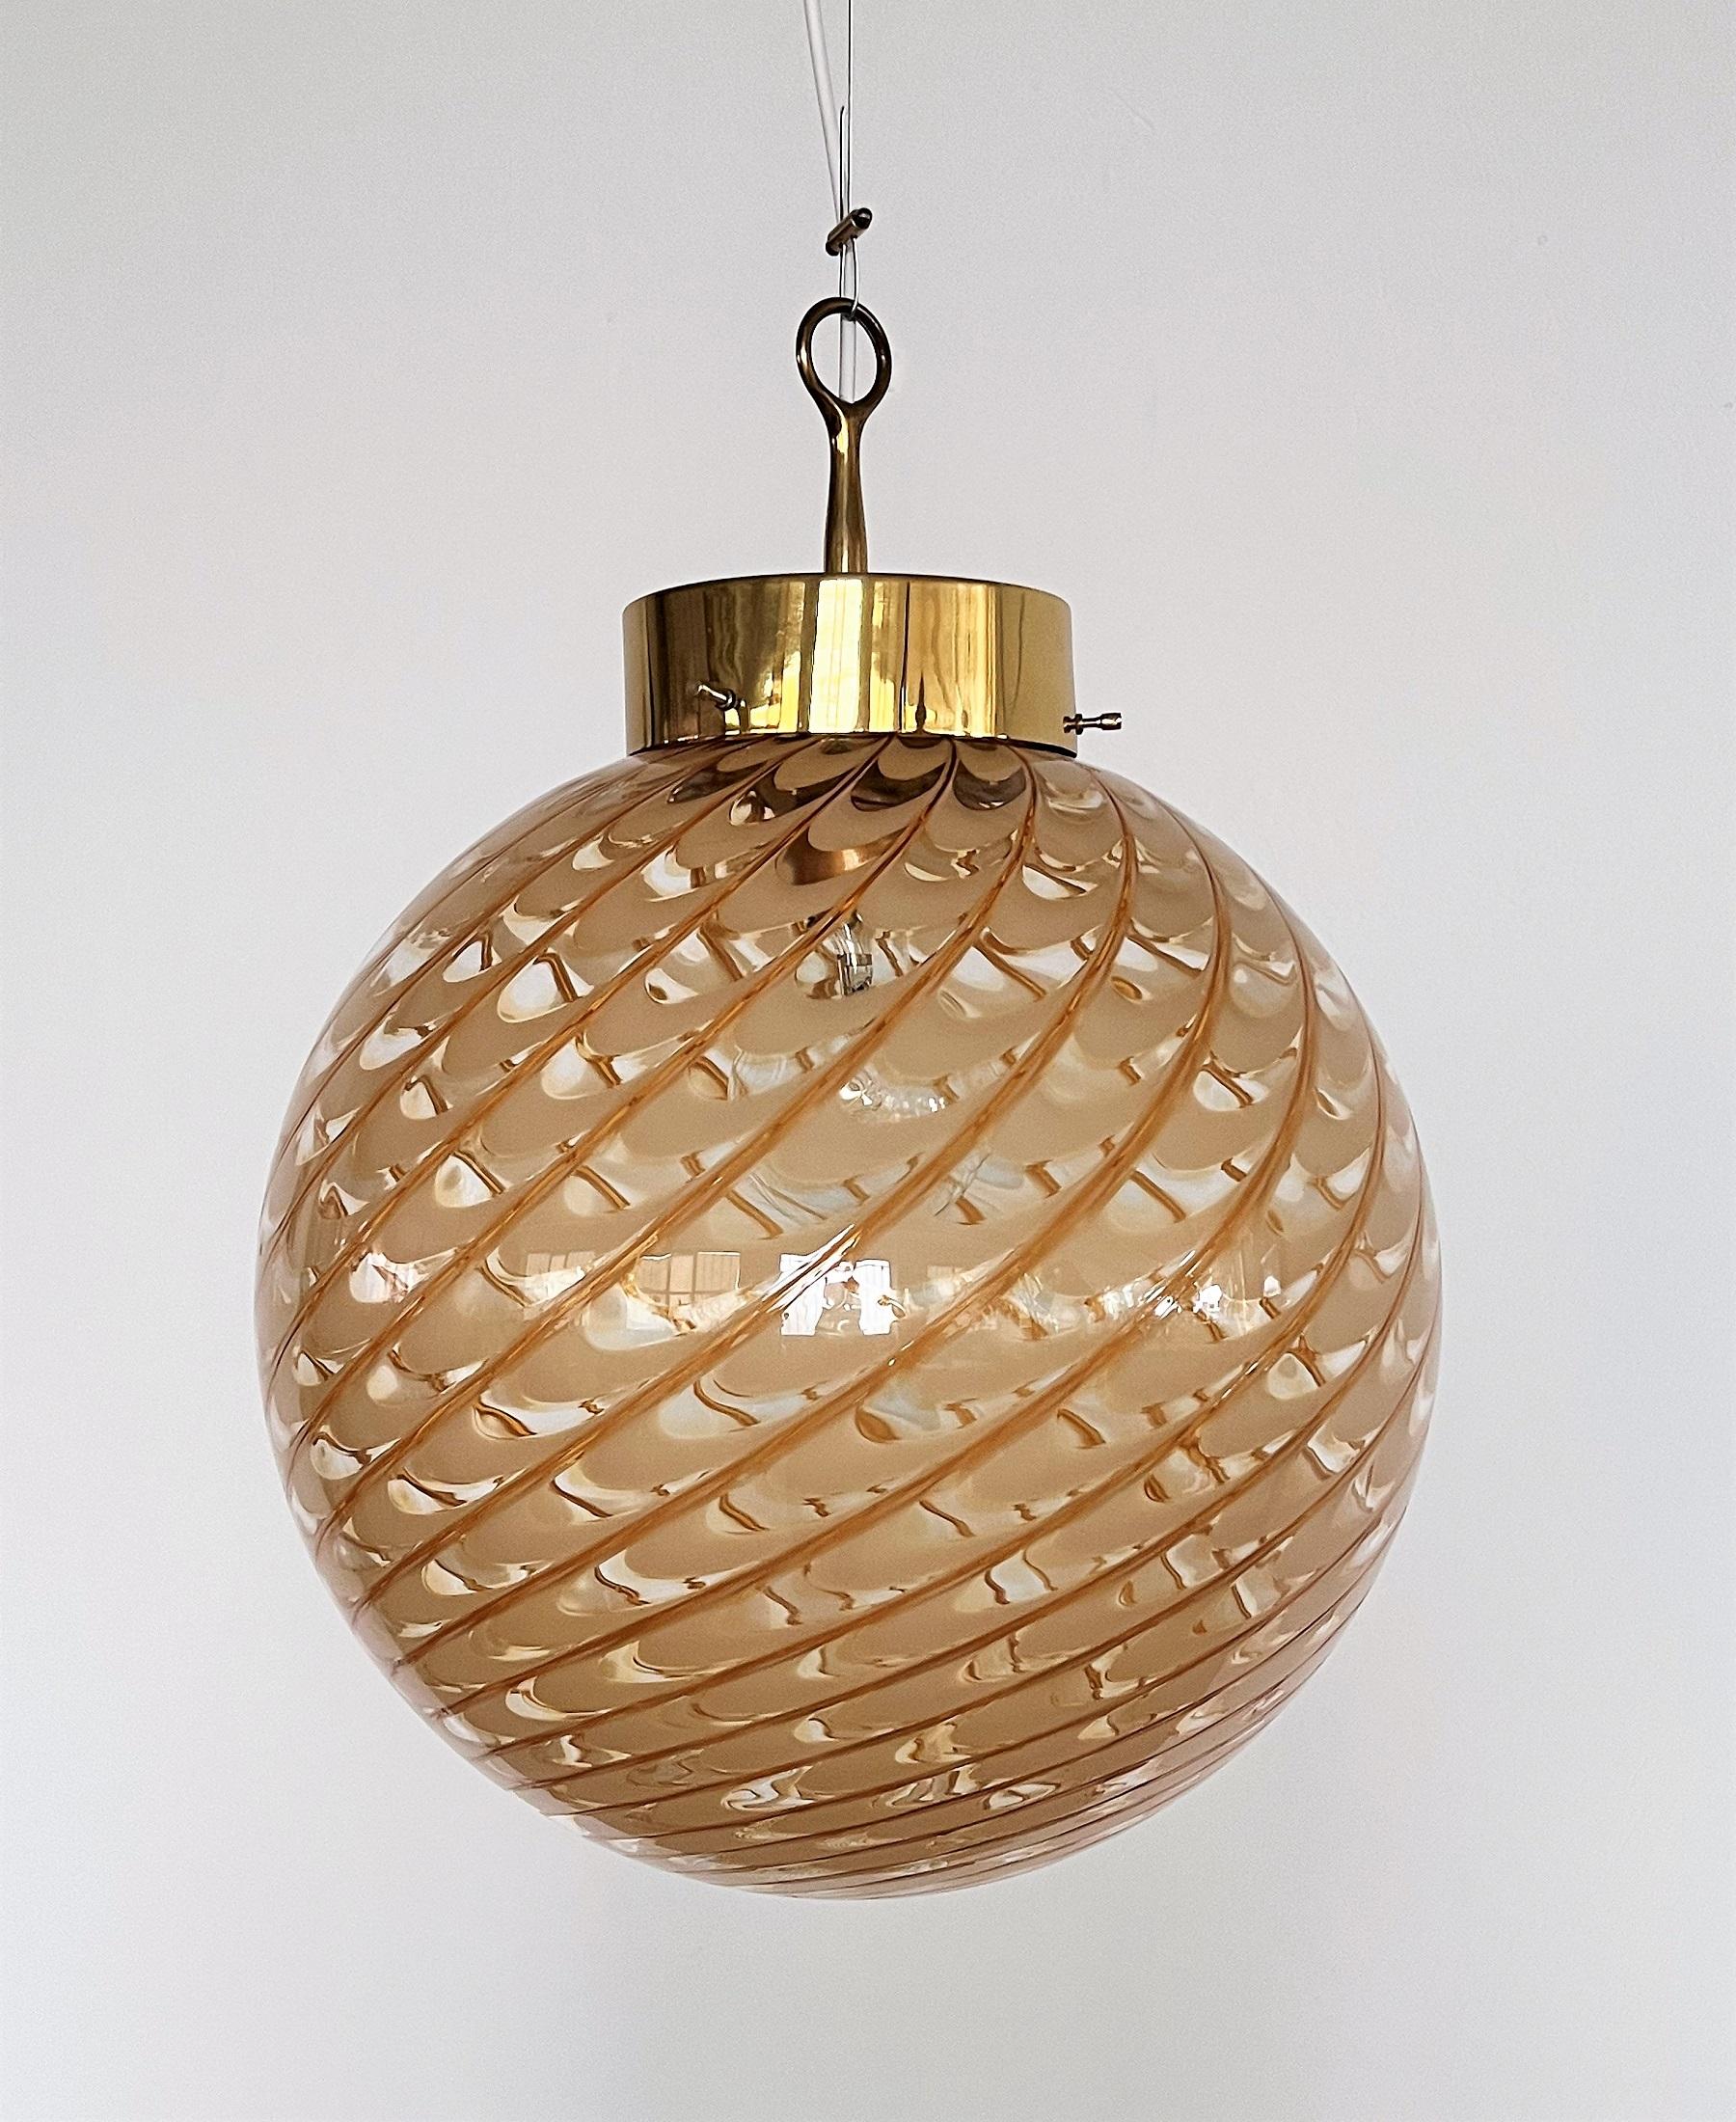 Late 20th Century Italian Midcentury Murano Glass Globe Chandelier with Brass Details, 1970s For Sale